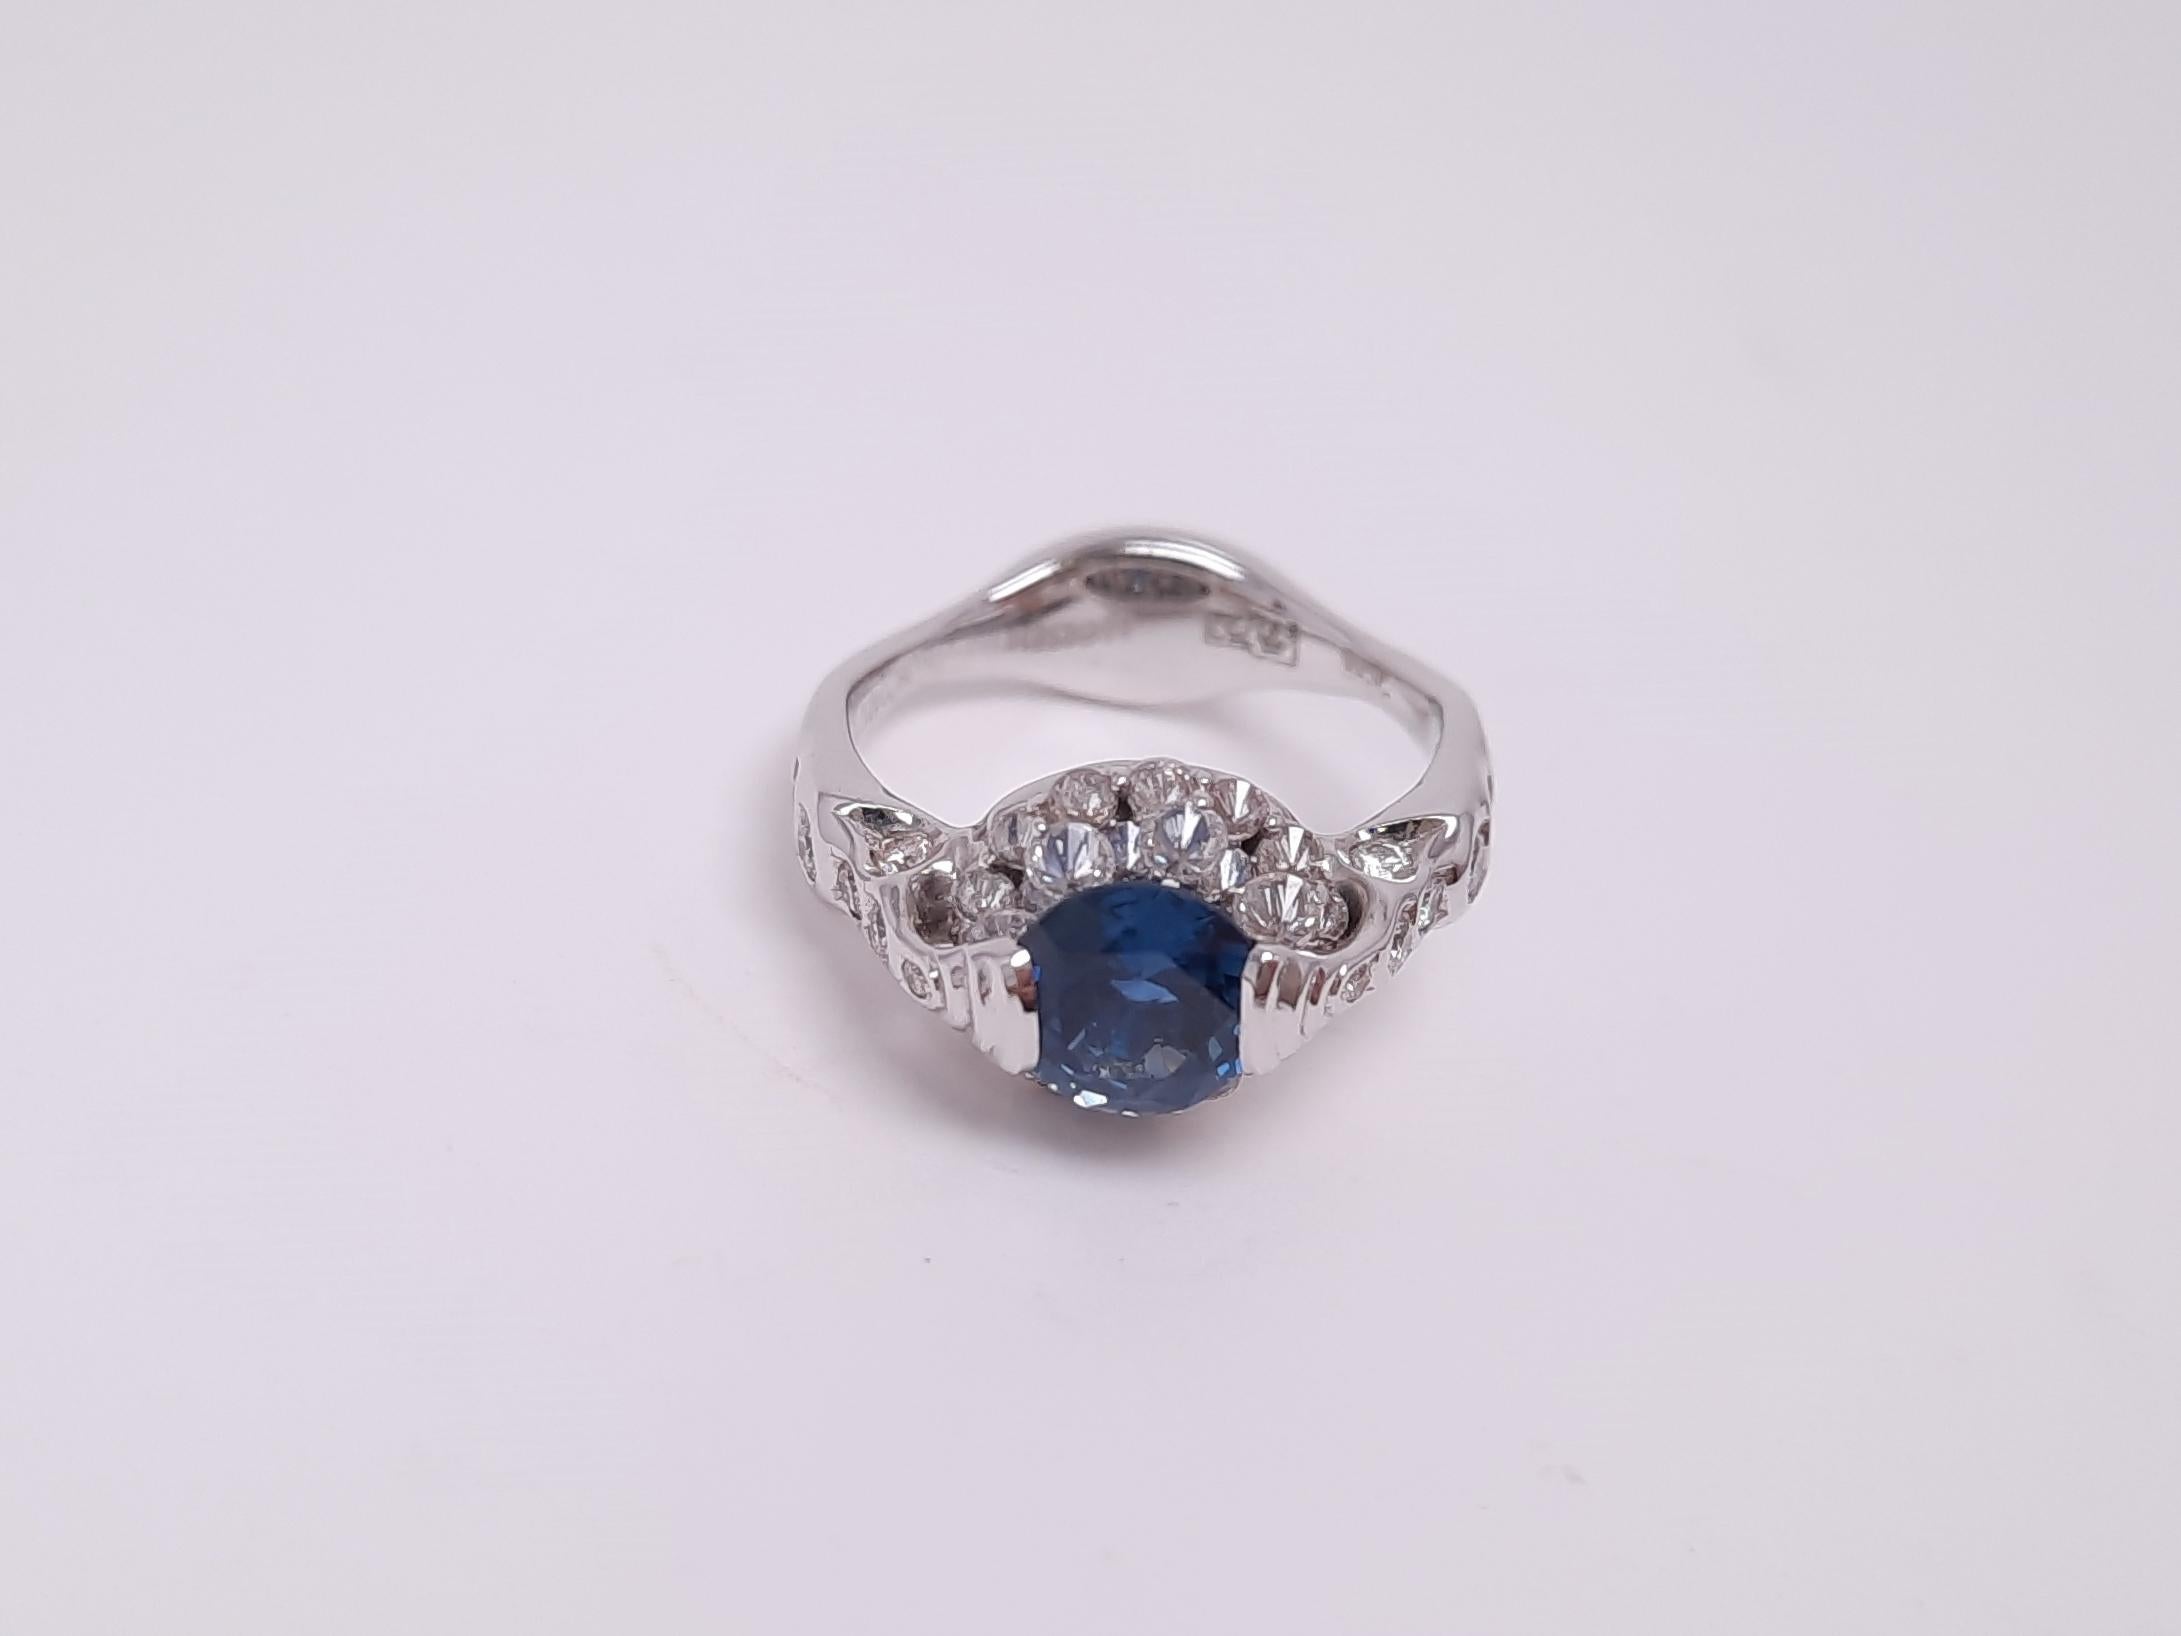 Sapphire has rich colour variations as mysterious northern light. Rainbow in the day, aurora borealis in the night. A gem and natural phenomenon miracle resonate to create a magnificent harmony in the 